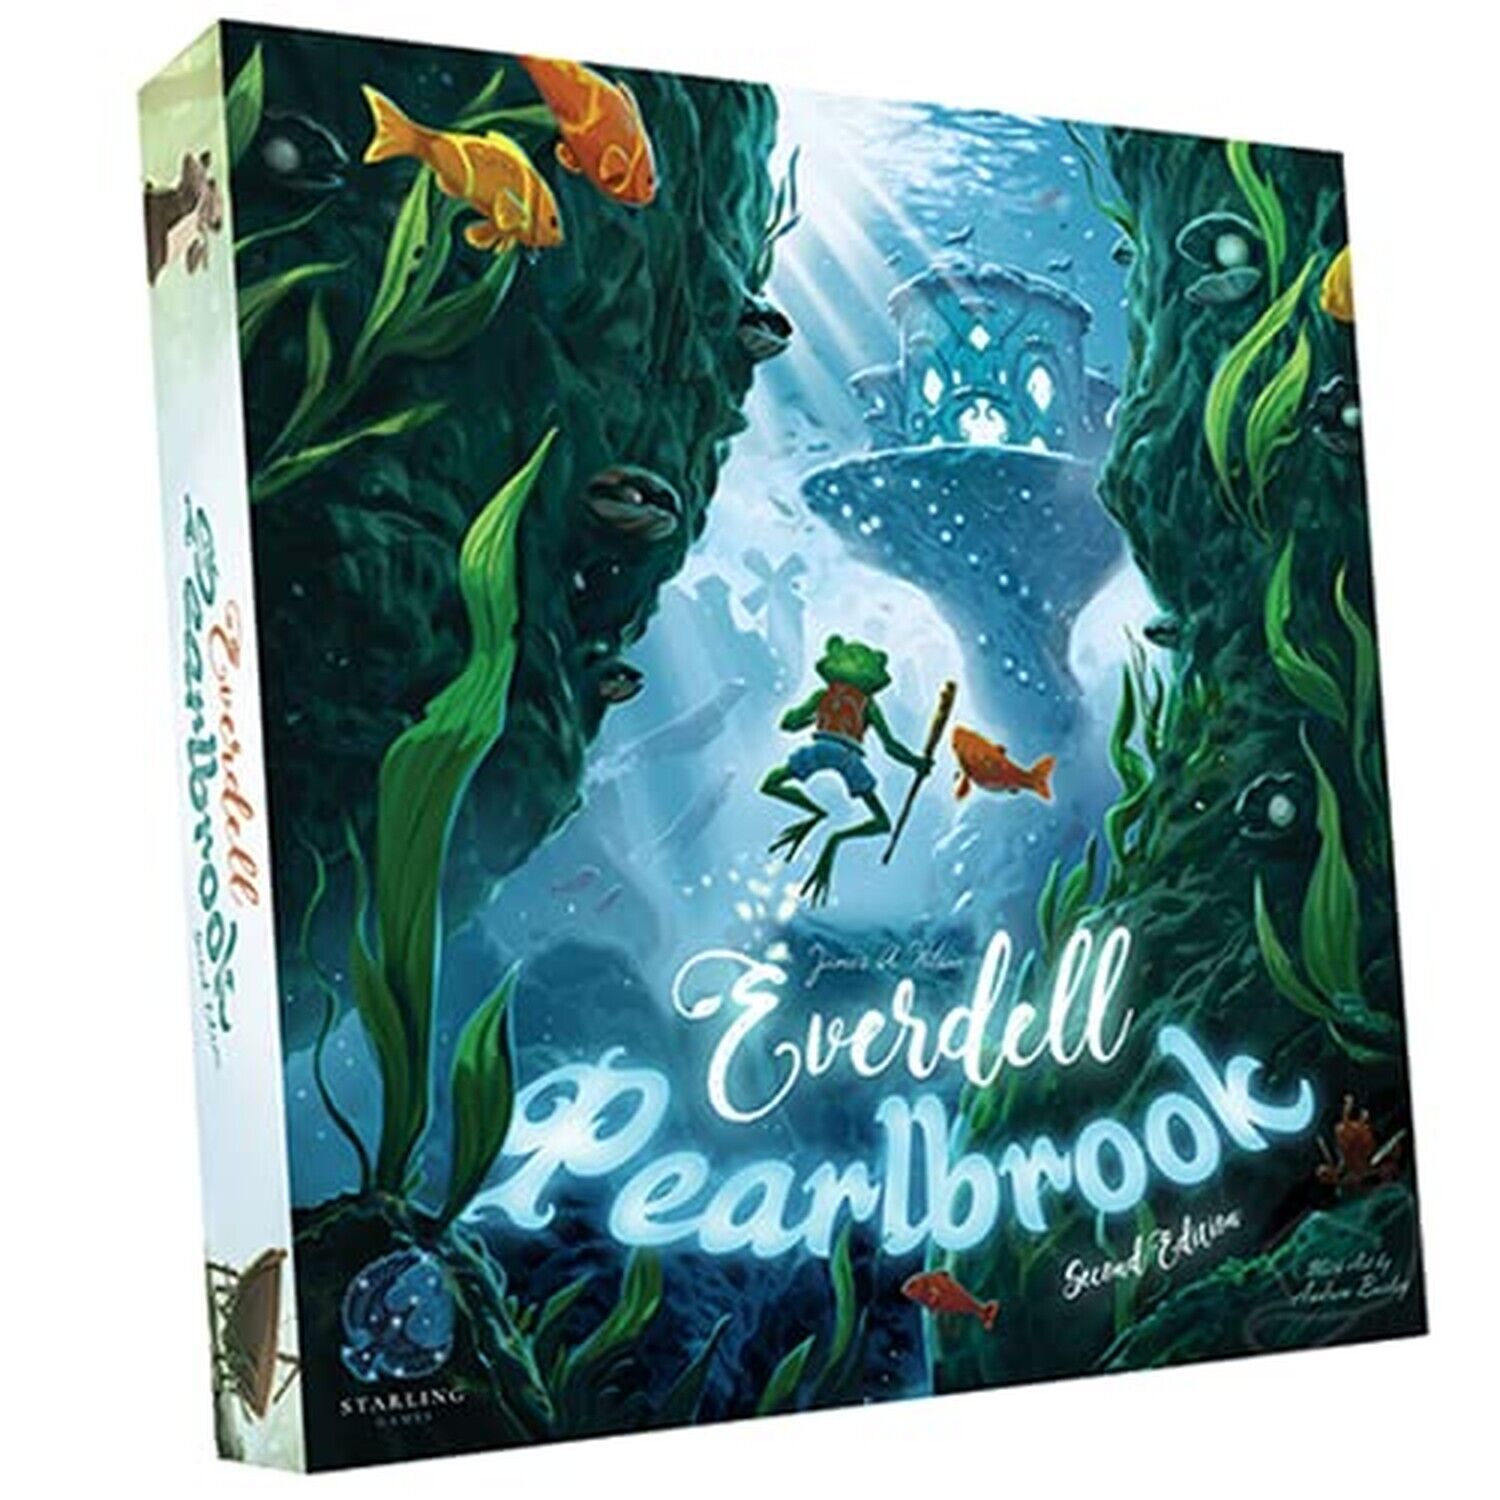 Starling Games Everdell Pearlbrook 2e editie